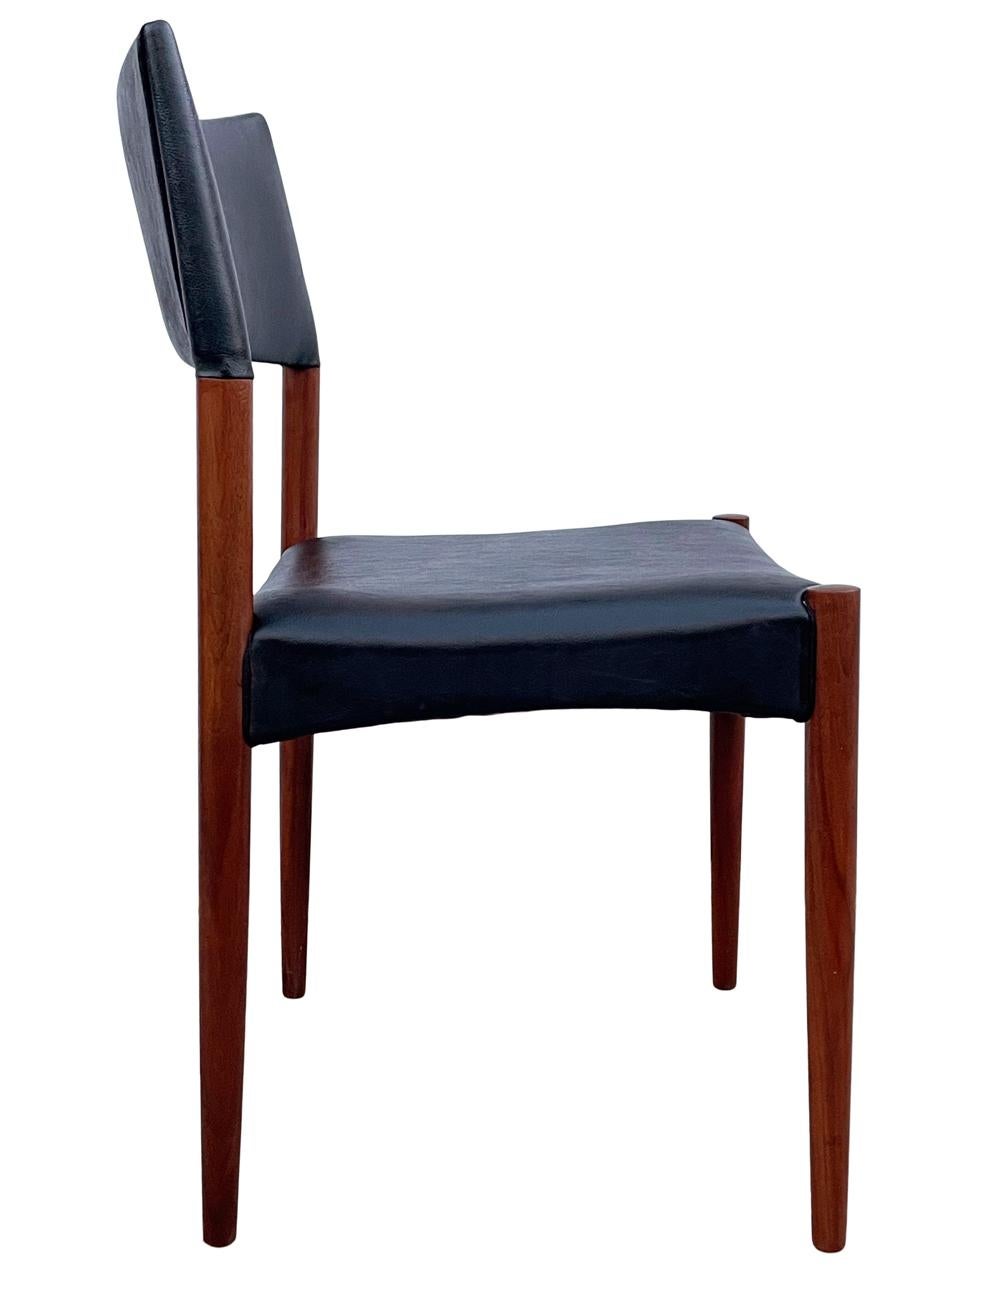 Naugahyde Set of 4 Mid Century Danish Modern Dining Chairs in Teak by Villy Schou Andersen For Sale